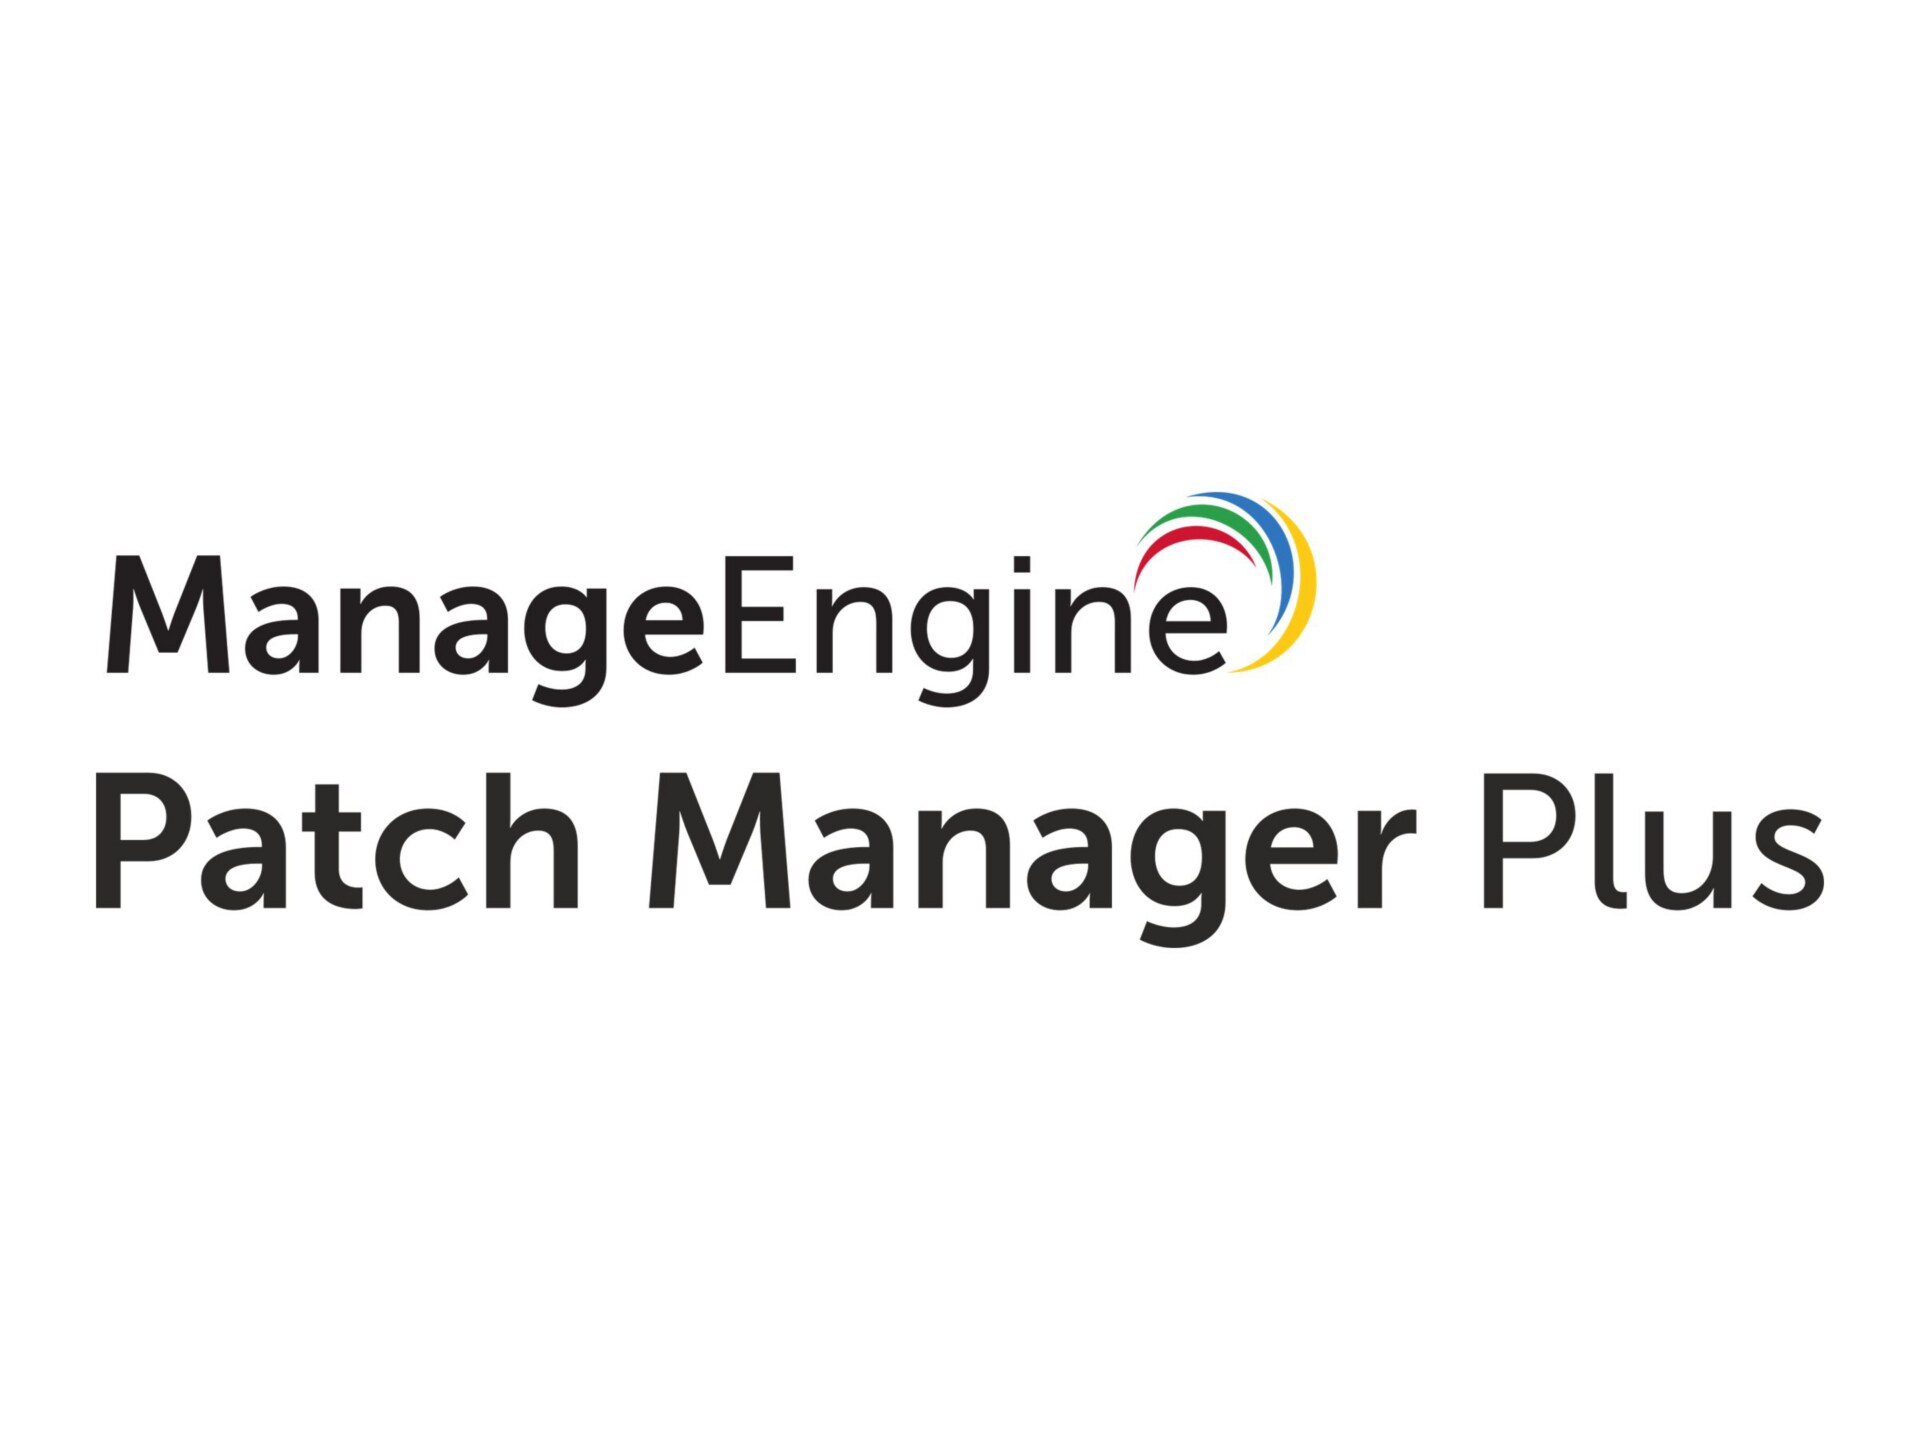 ManageEngine Patch Manager Plus Professional Edition - subscription license